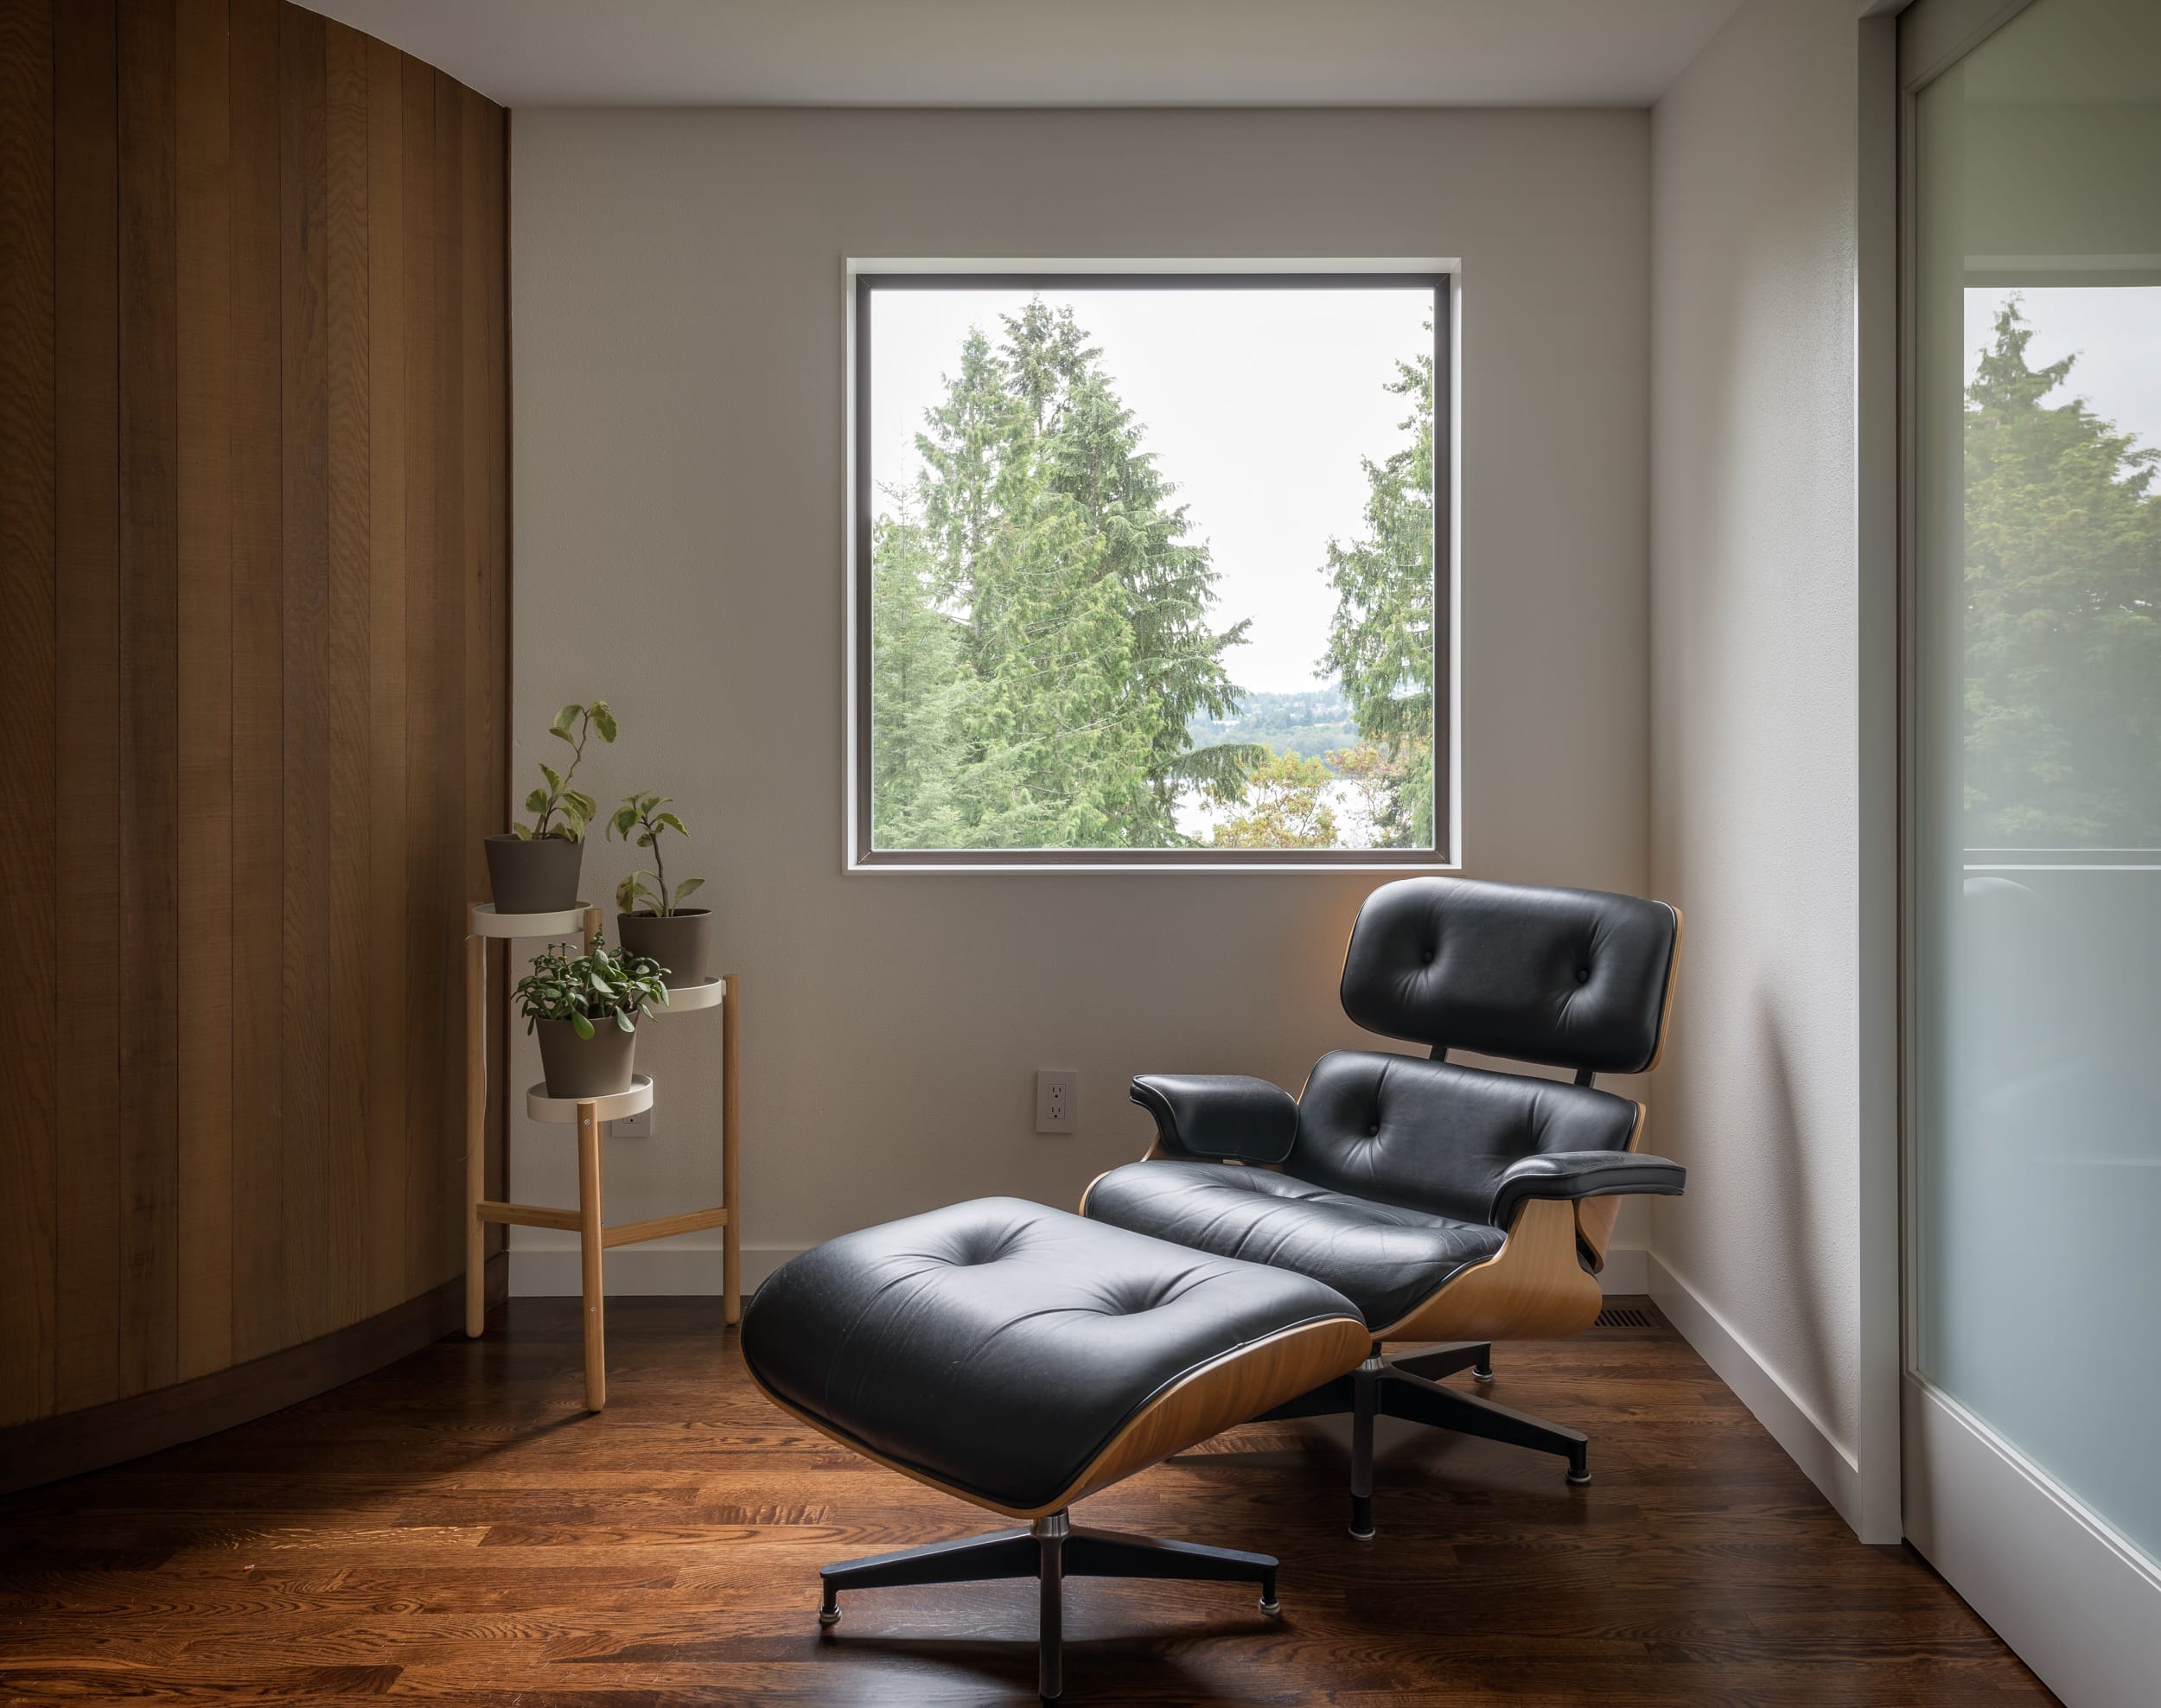 Eames lounge chair in a room with a window.